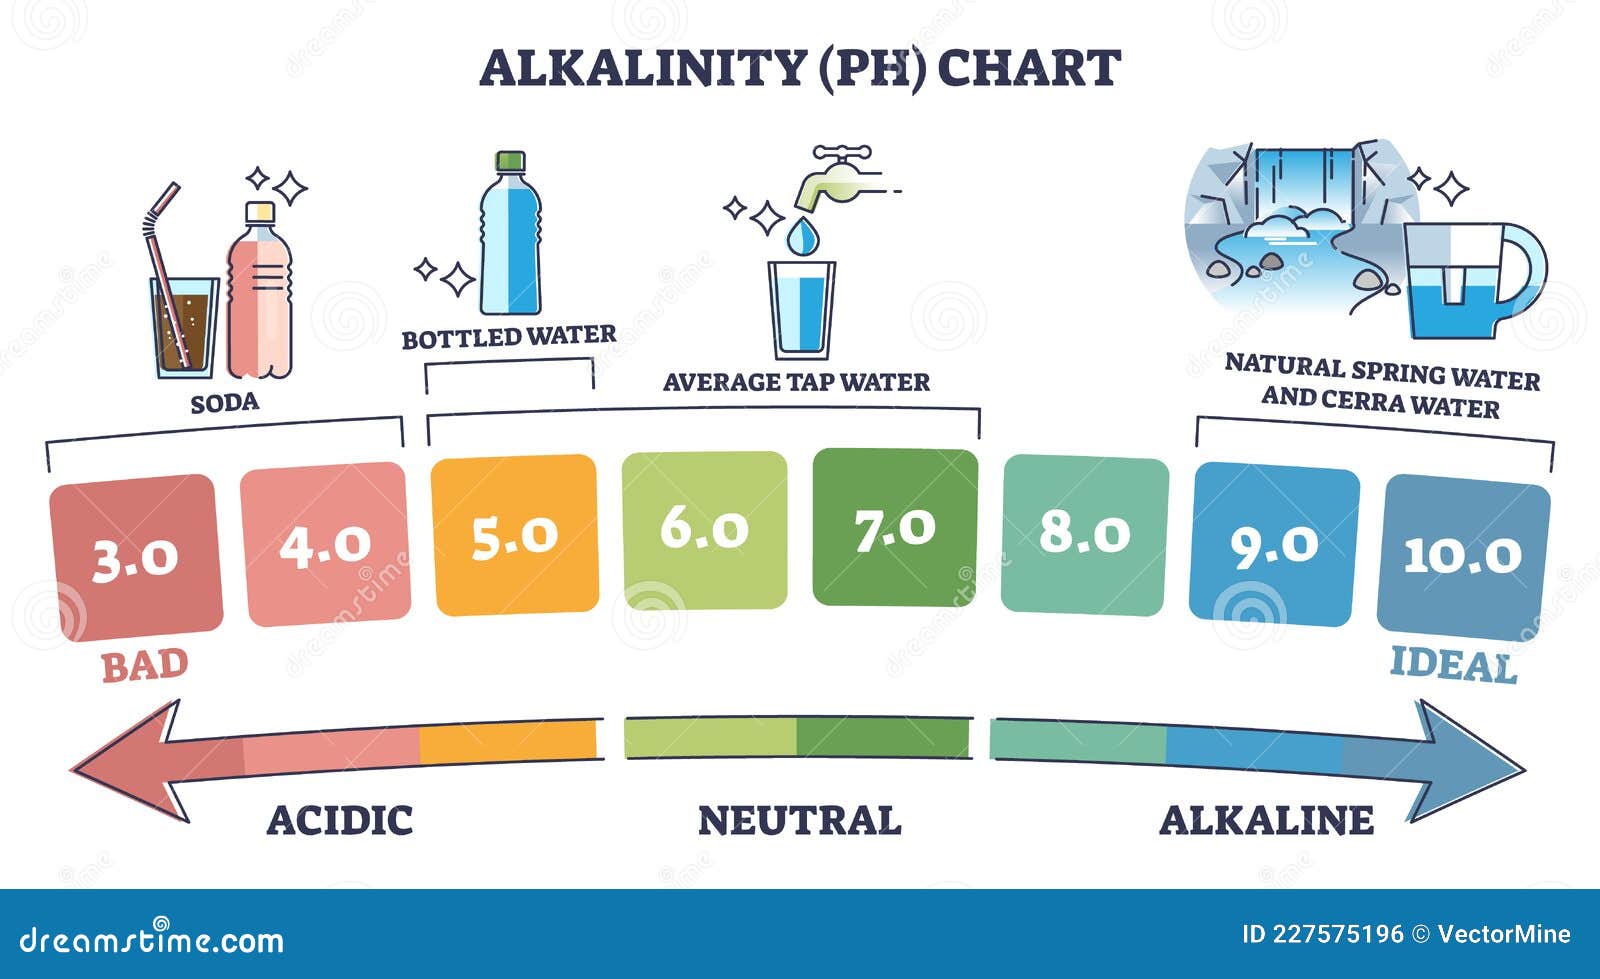 alkalinity-ph-chart-with-water-acidity-from-bad-to-ideal-outline-diagram-stock-vector